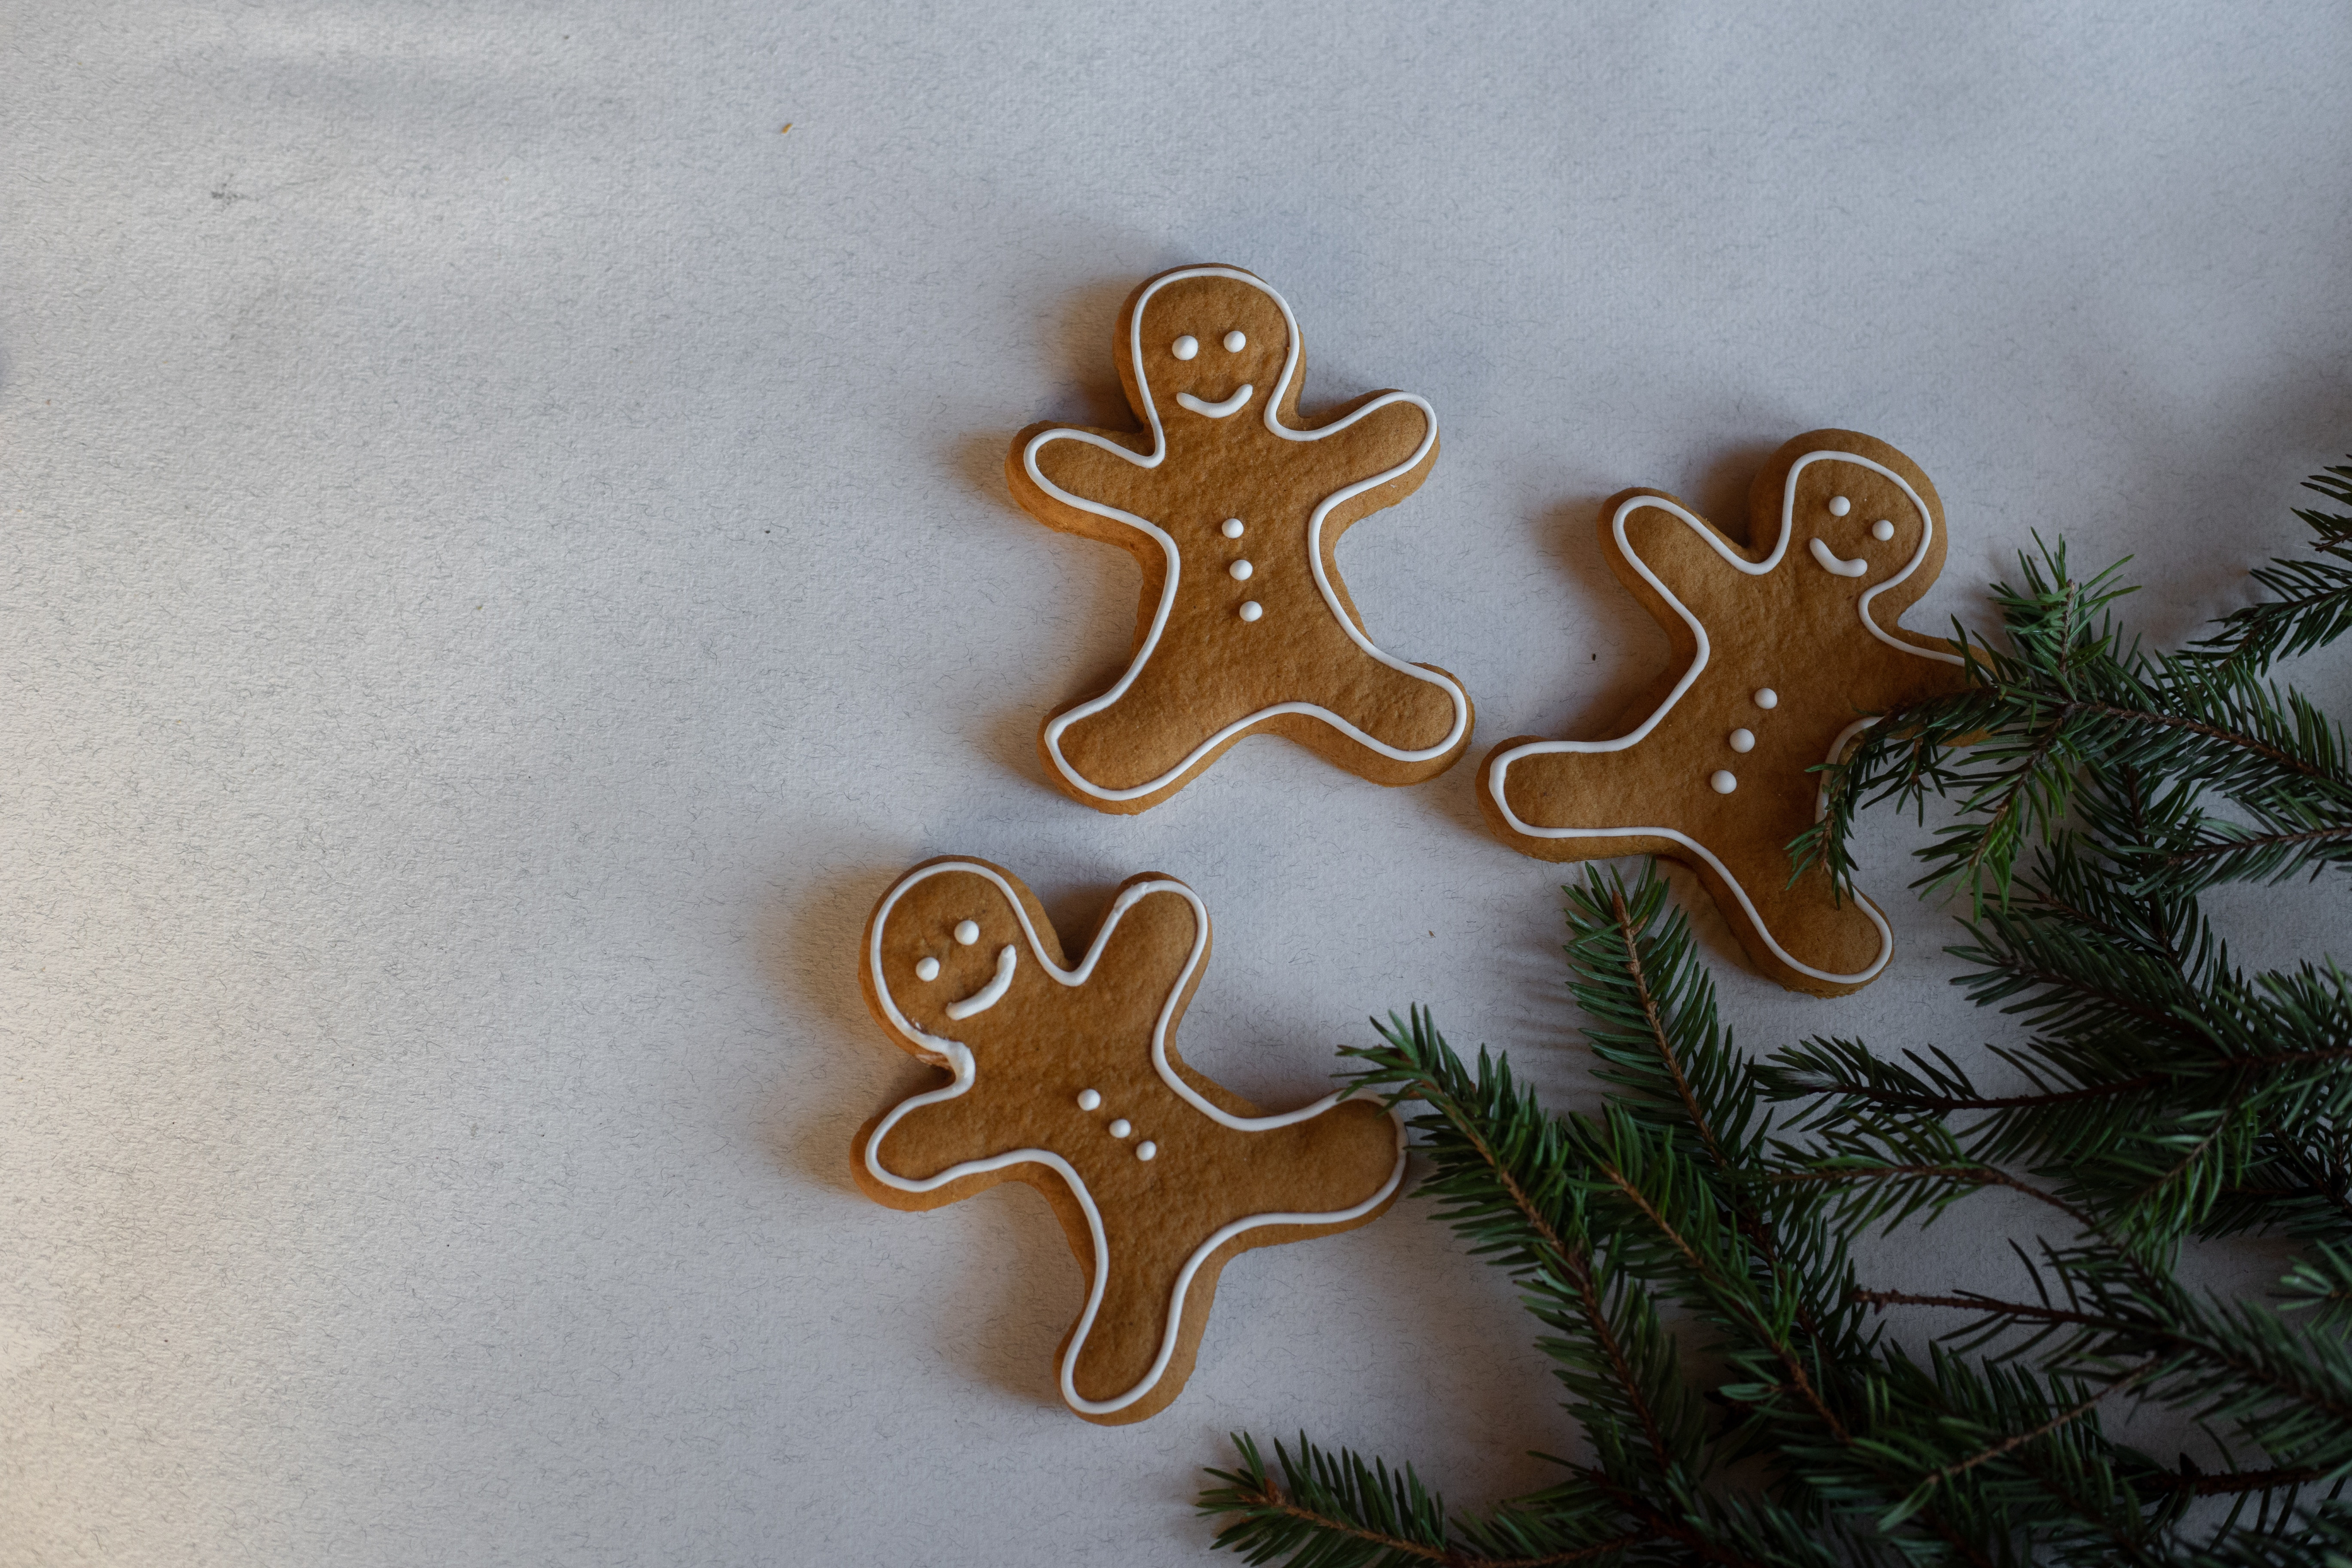 Three gingerbread cookies shaped like cartoon people, with thin white lines of icing tracing their outlines and forming their eyes, smiling mouth, and three shirt buttons. A few branches of a Christmas tree are just barely visible in the bottom right corner.